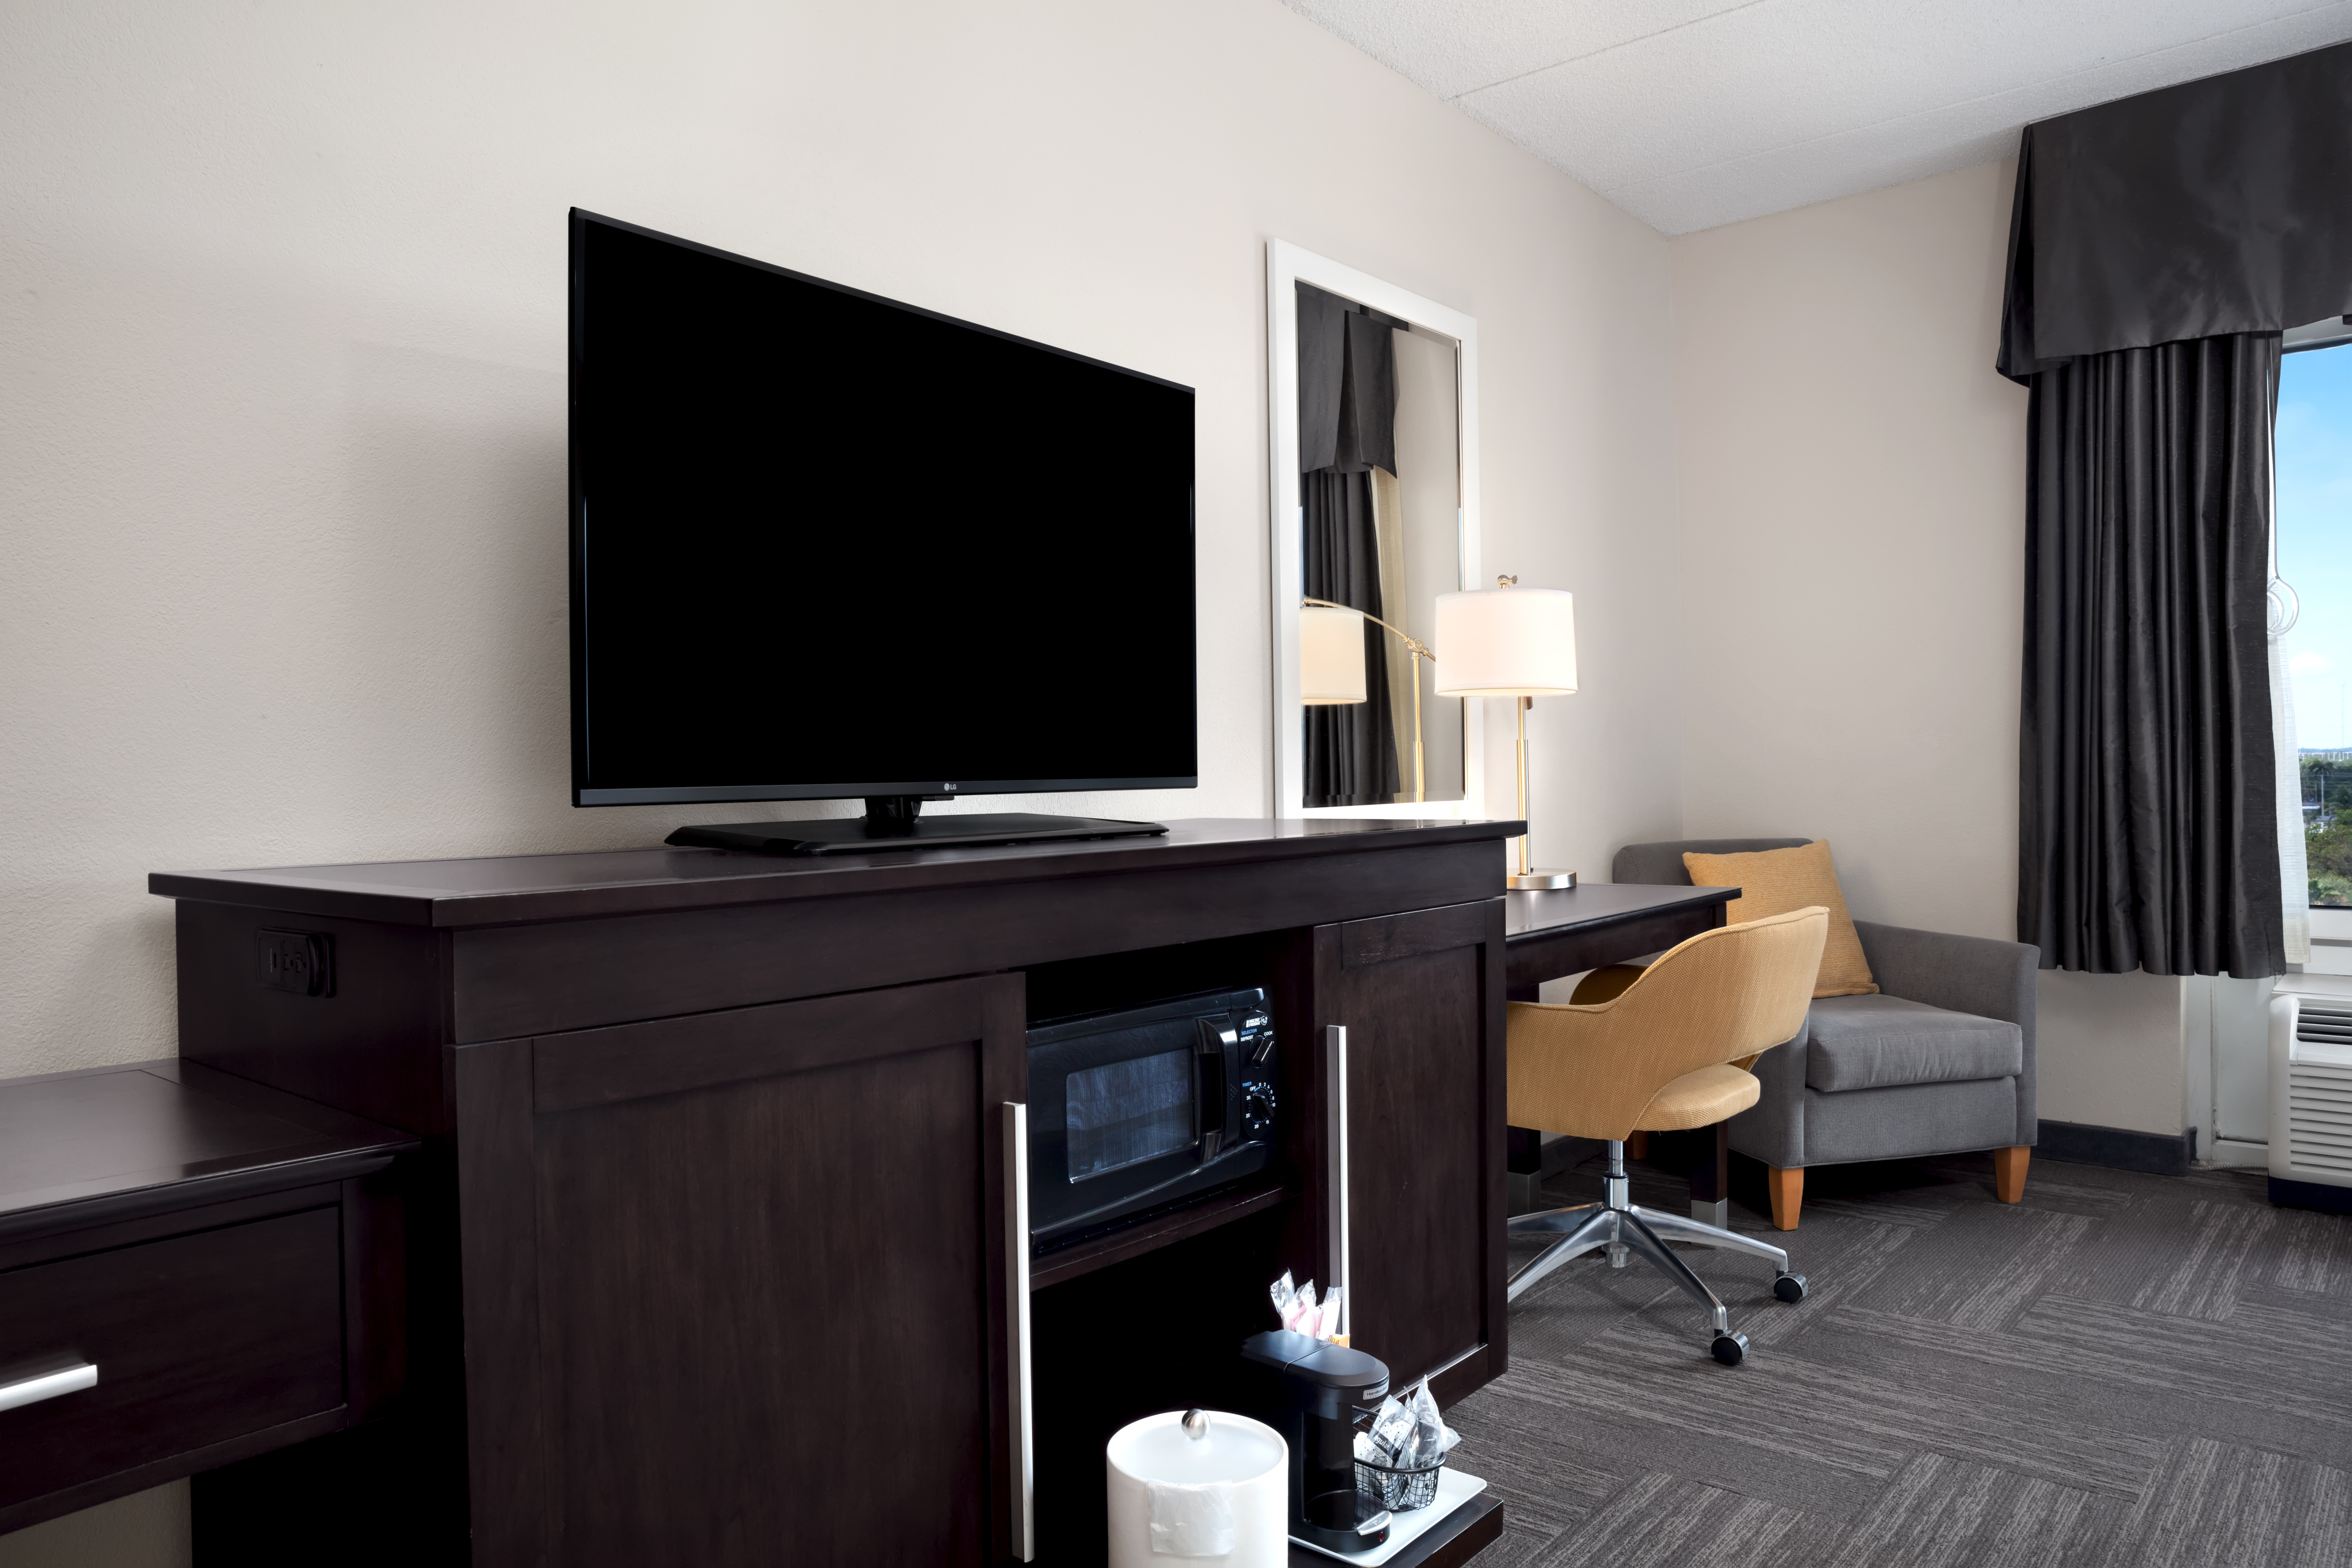 HDTV Microwave Coffemaker Work Desk and Armchair in Hotel Guest Room 